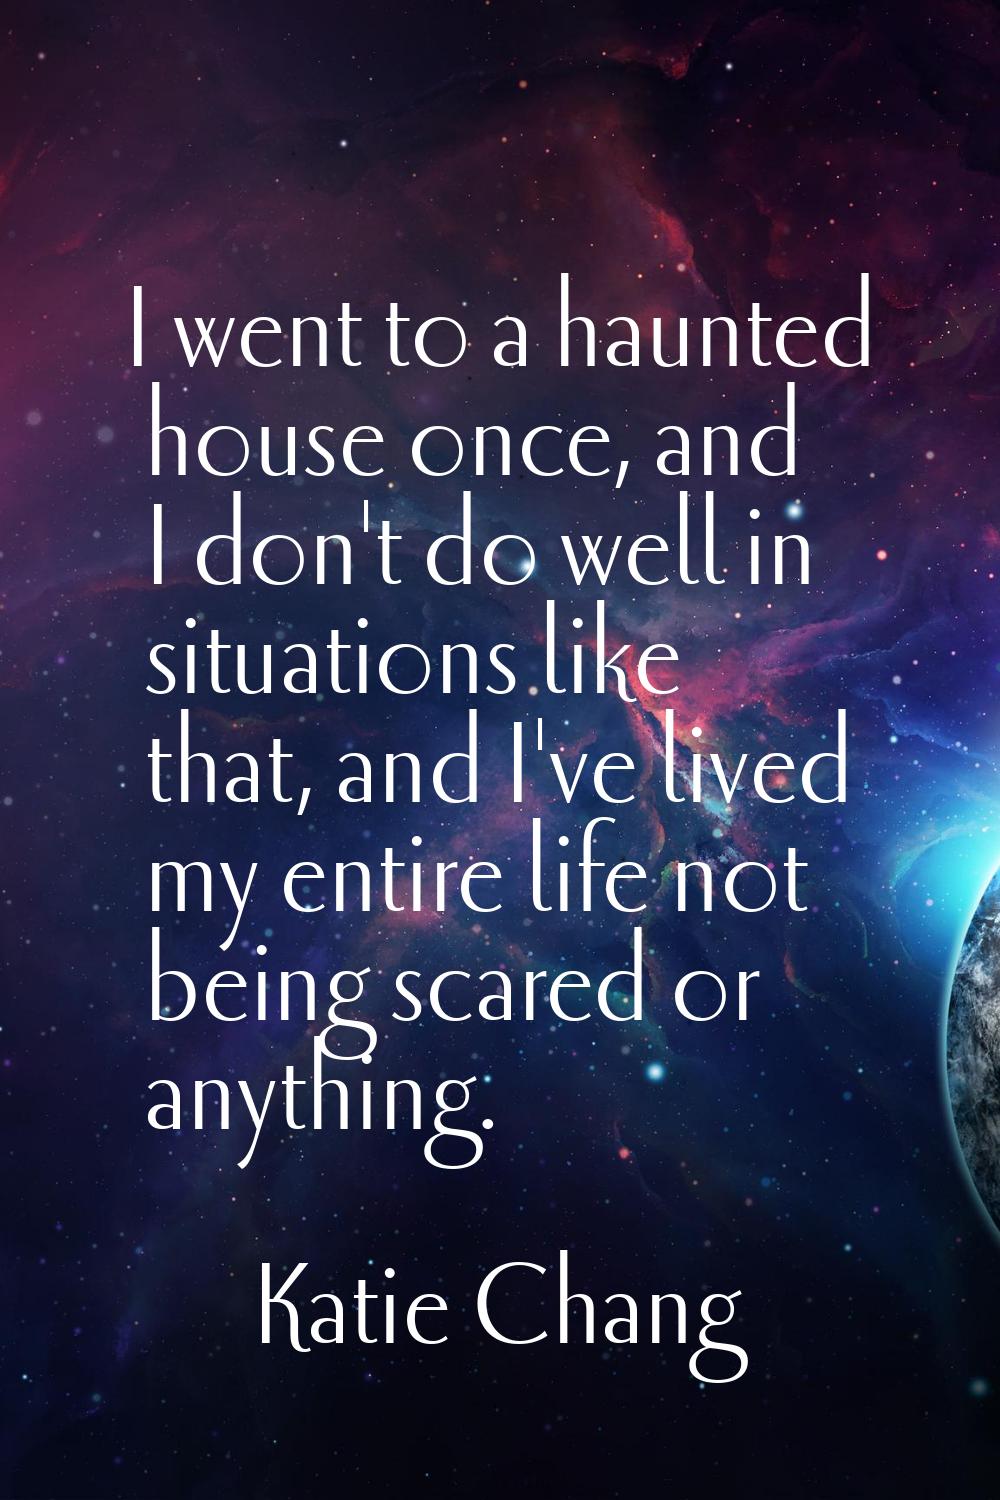 I went to a haunted house once, and I don't do well in situations like that, and I've lived my enti